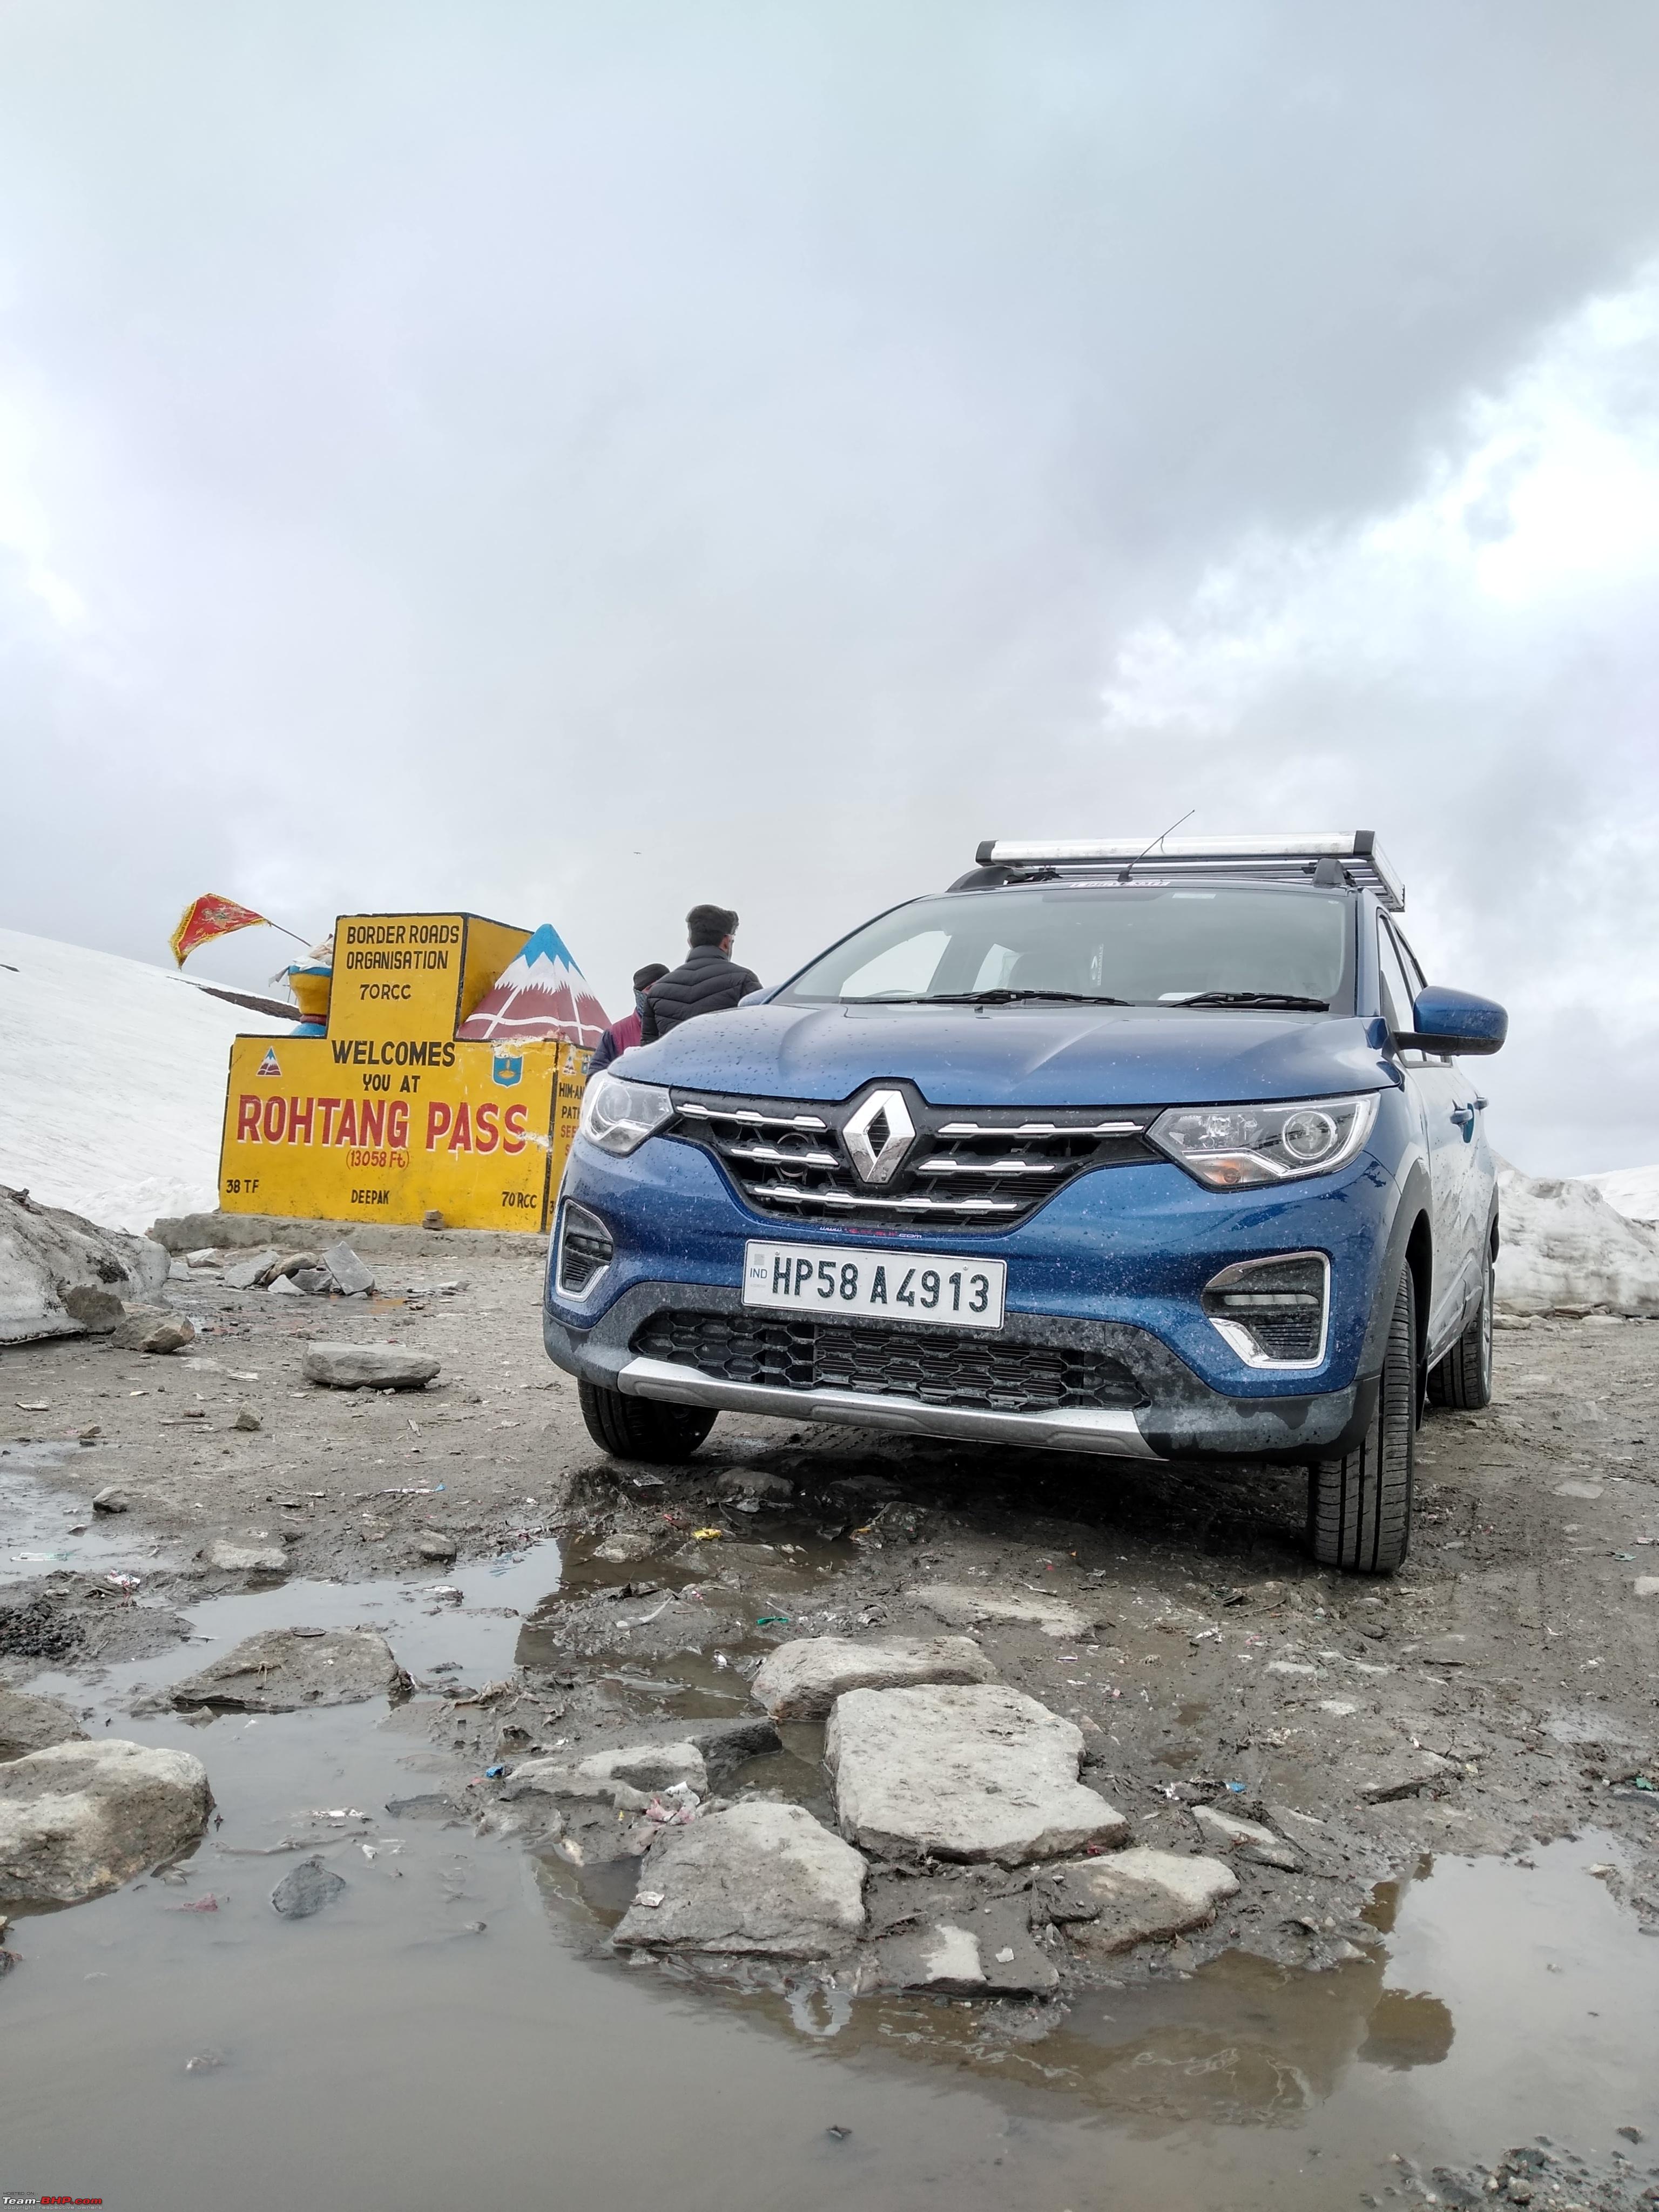 Renault launches 'Made in India' Triber in South Africa